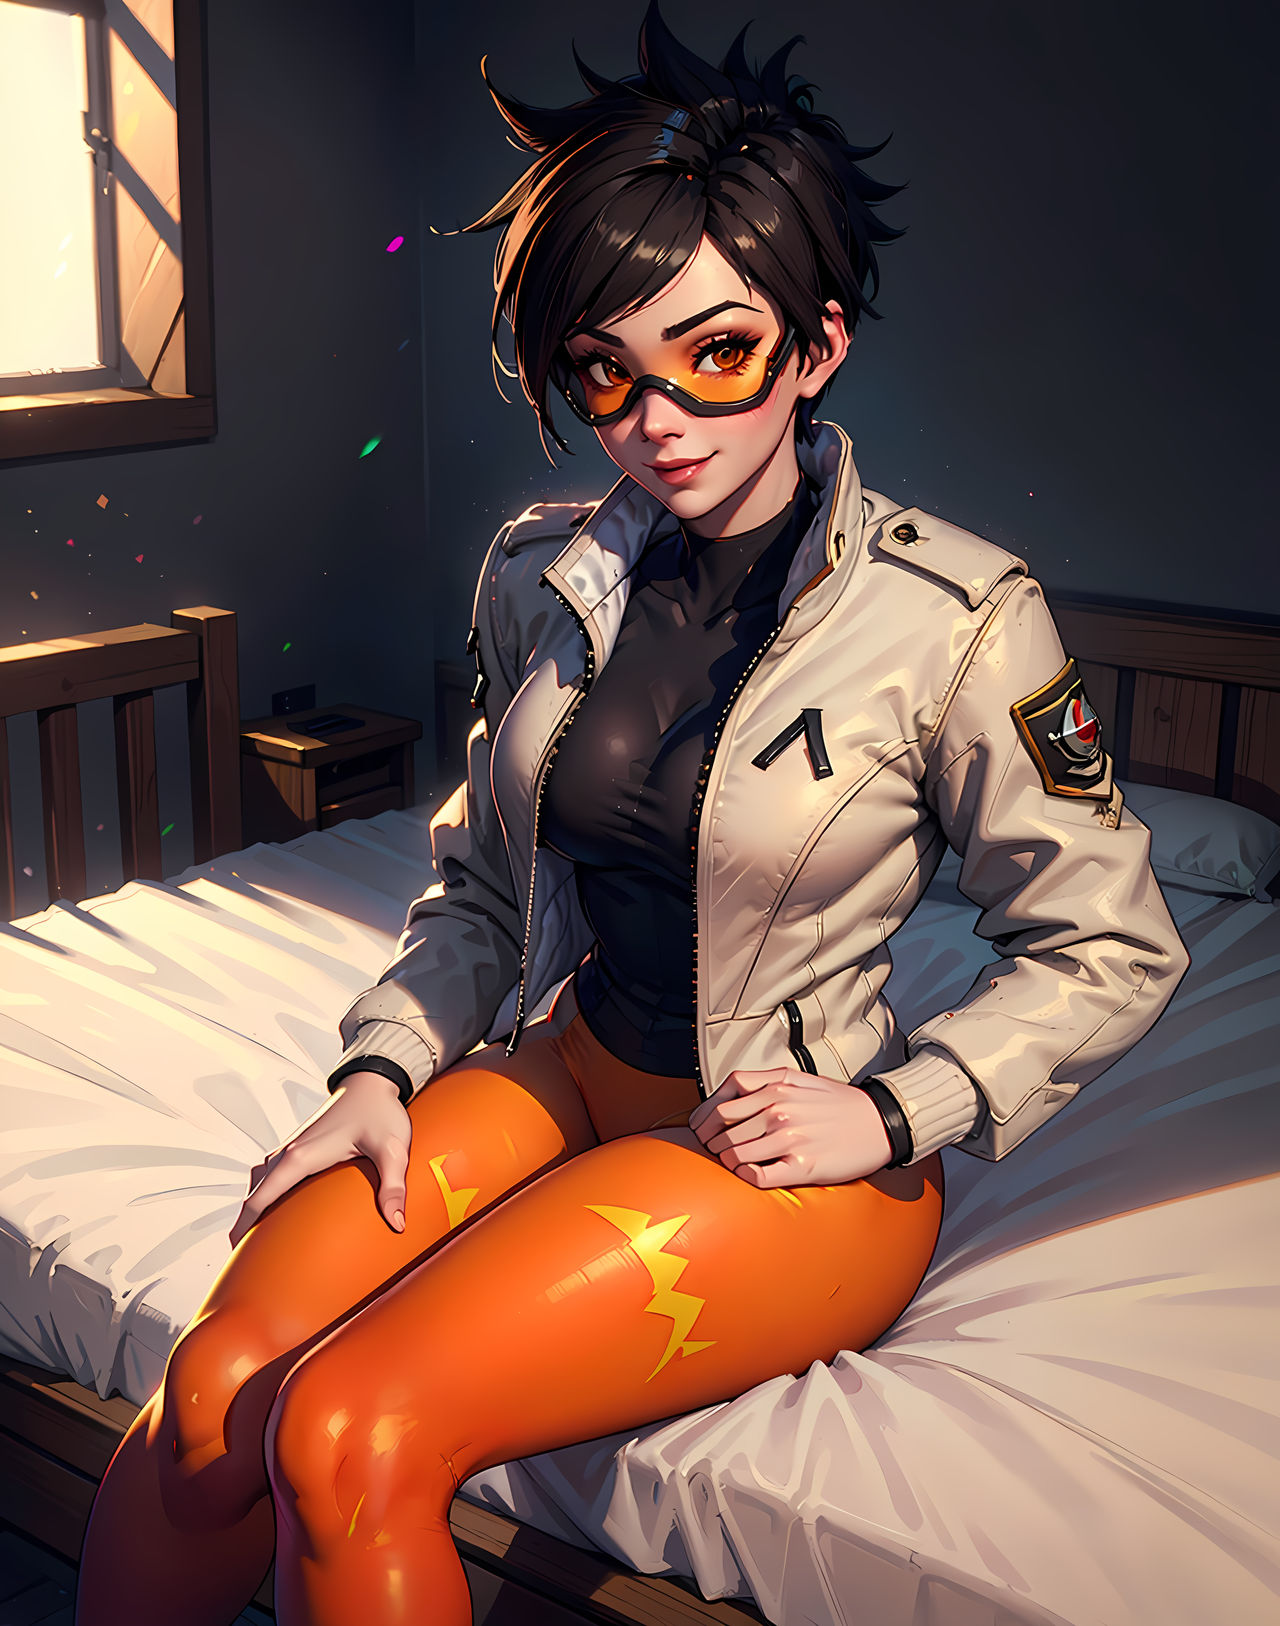 Tracer from Overwatch by Dantegonist on DeviantArt